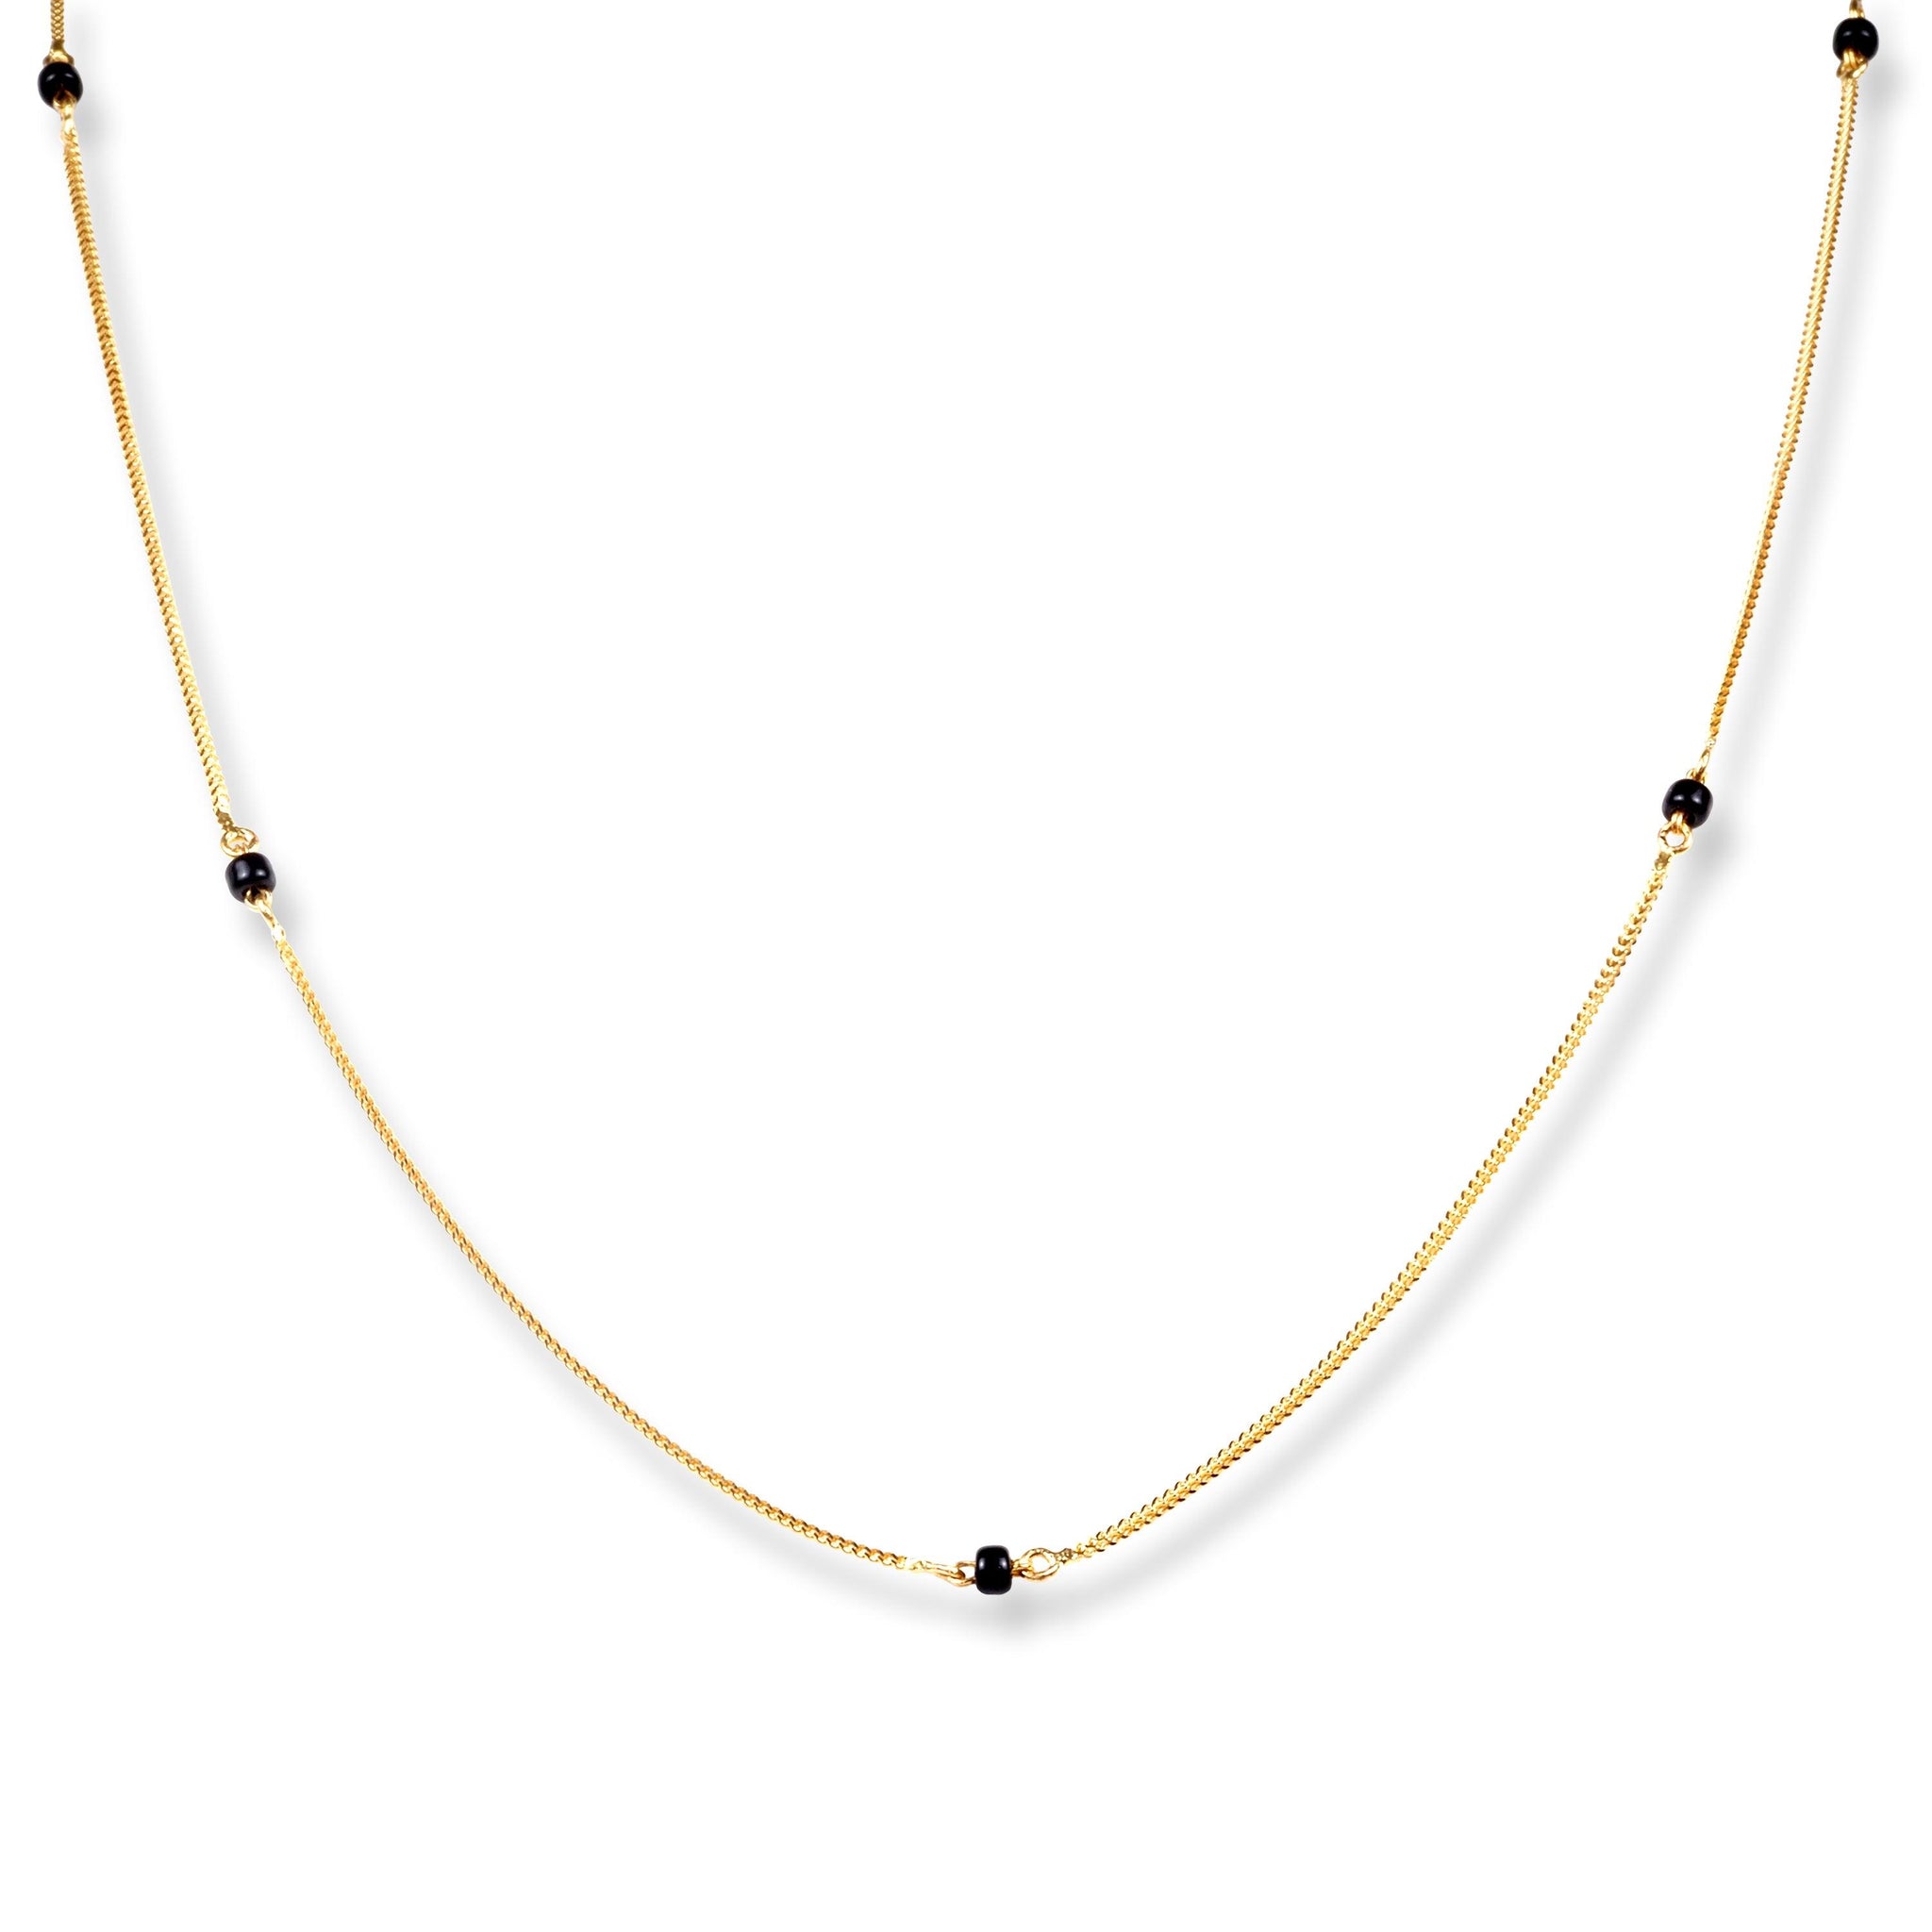 22ct Gold Foxtail Chain with Single Black Beads at Intervals with Lobster Clasp C-7144